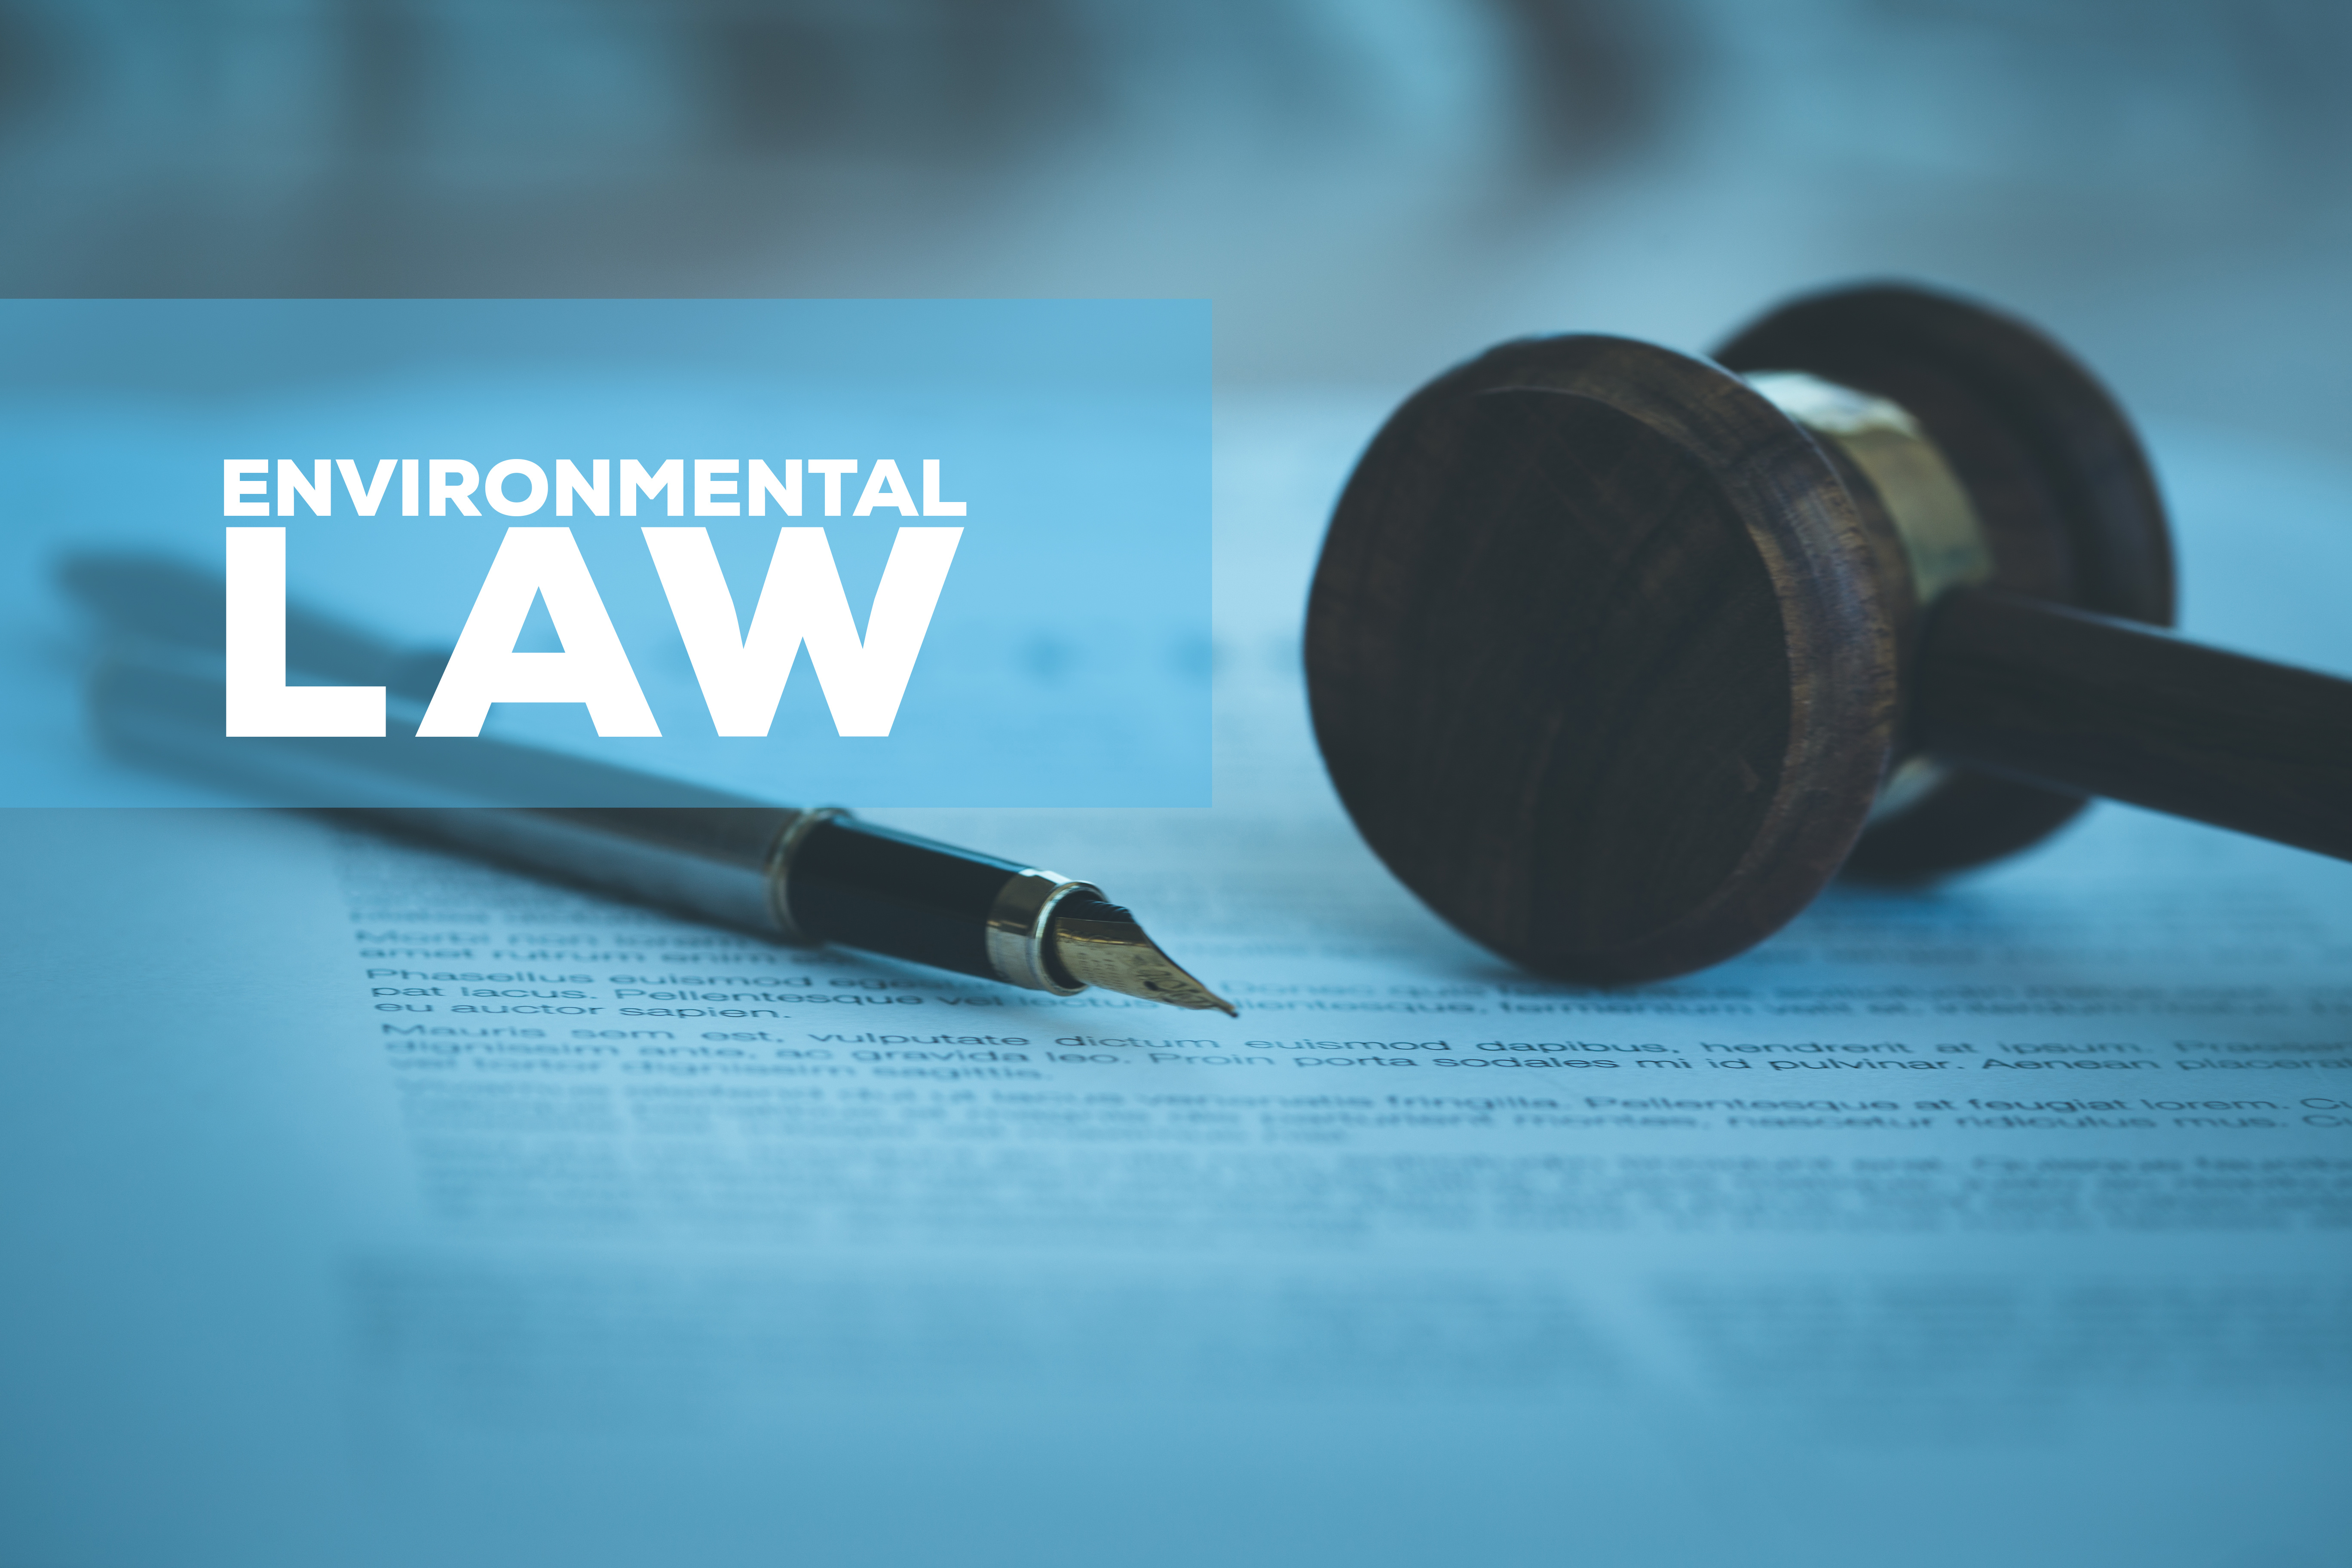 environmental policy, law and regulation